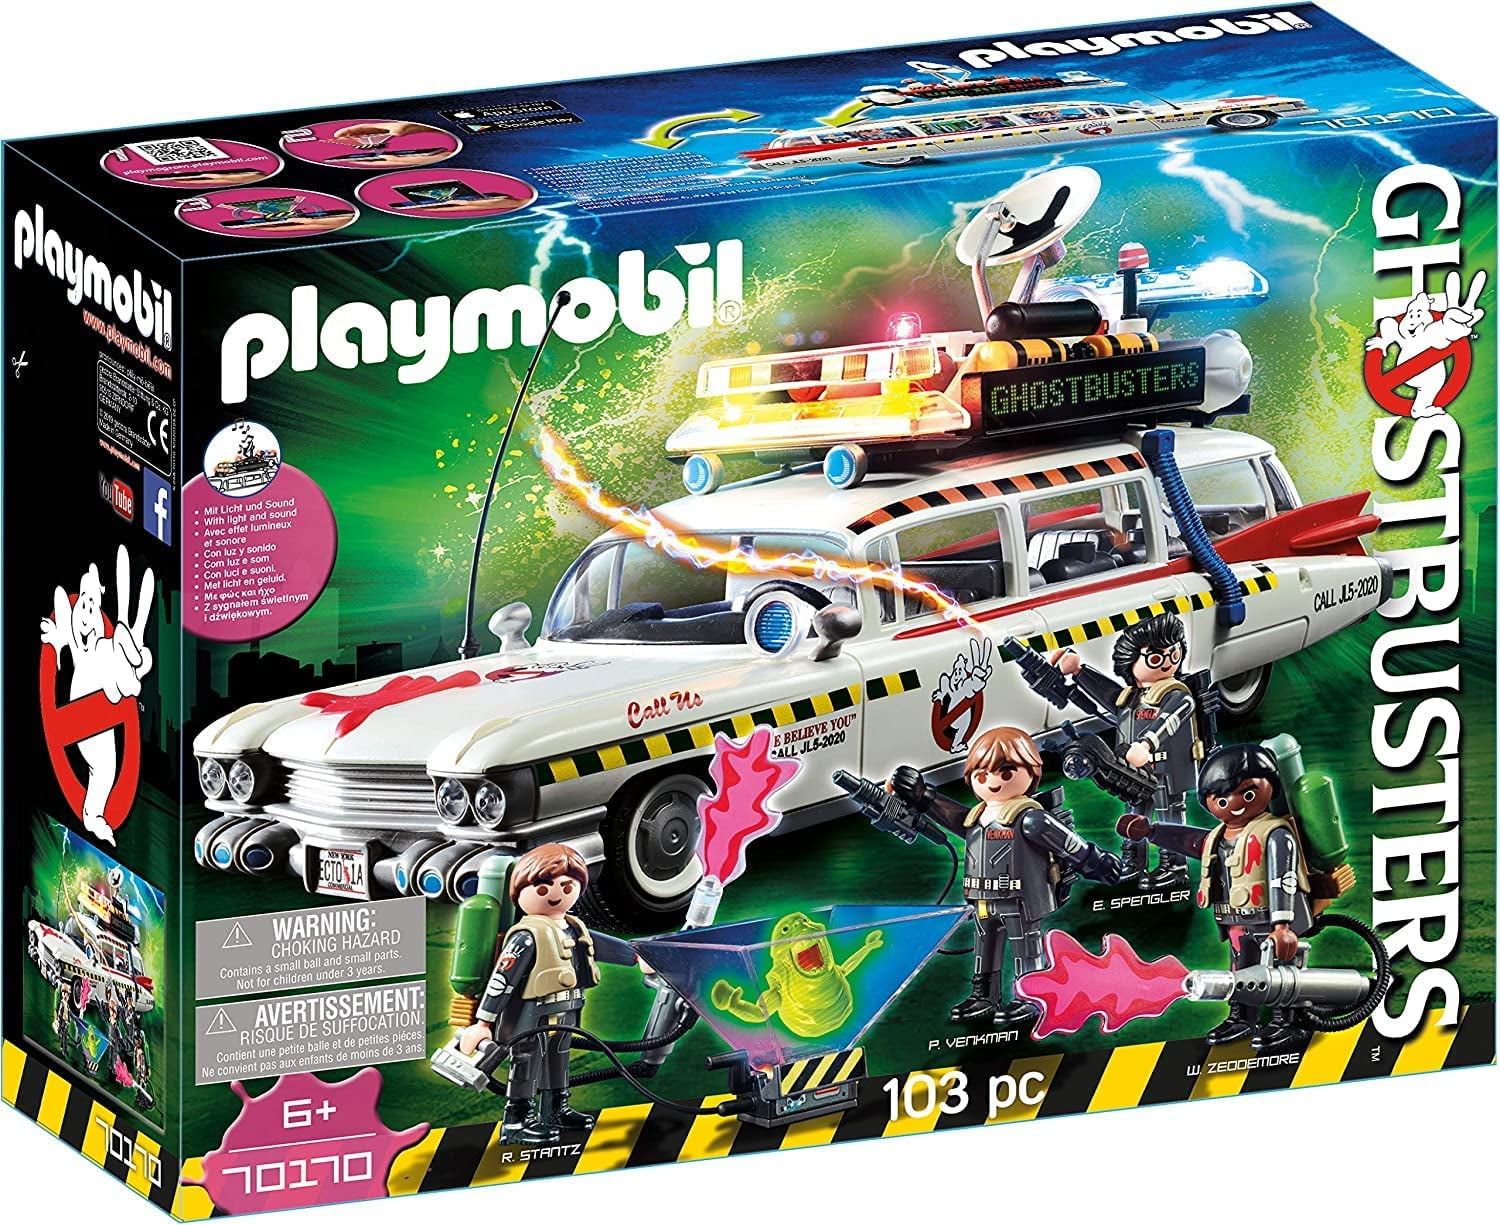 Playmobil Ghostbusters Ecto-1A 